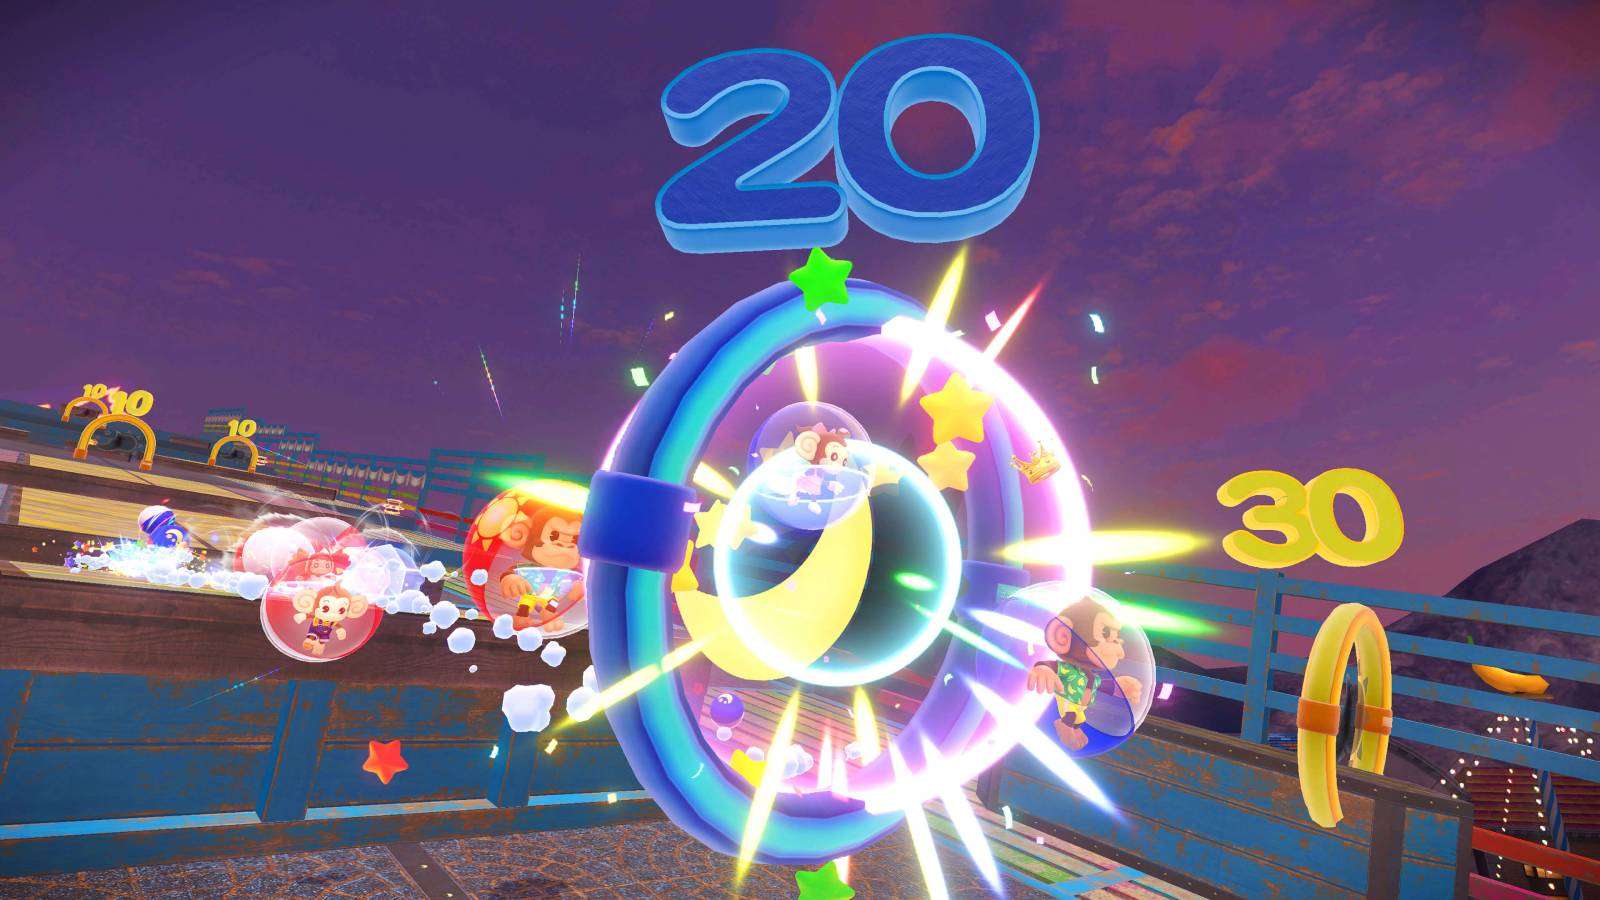 A screenshot from Super Monkey Ball Banana Rumble shows monkeys earning points by moving through a goal